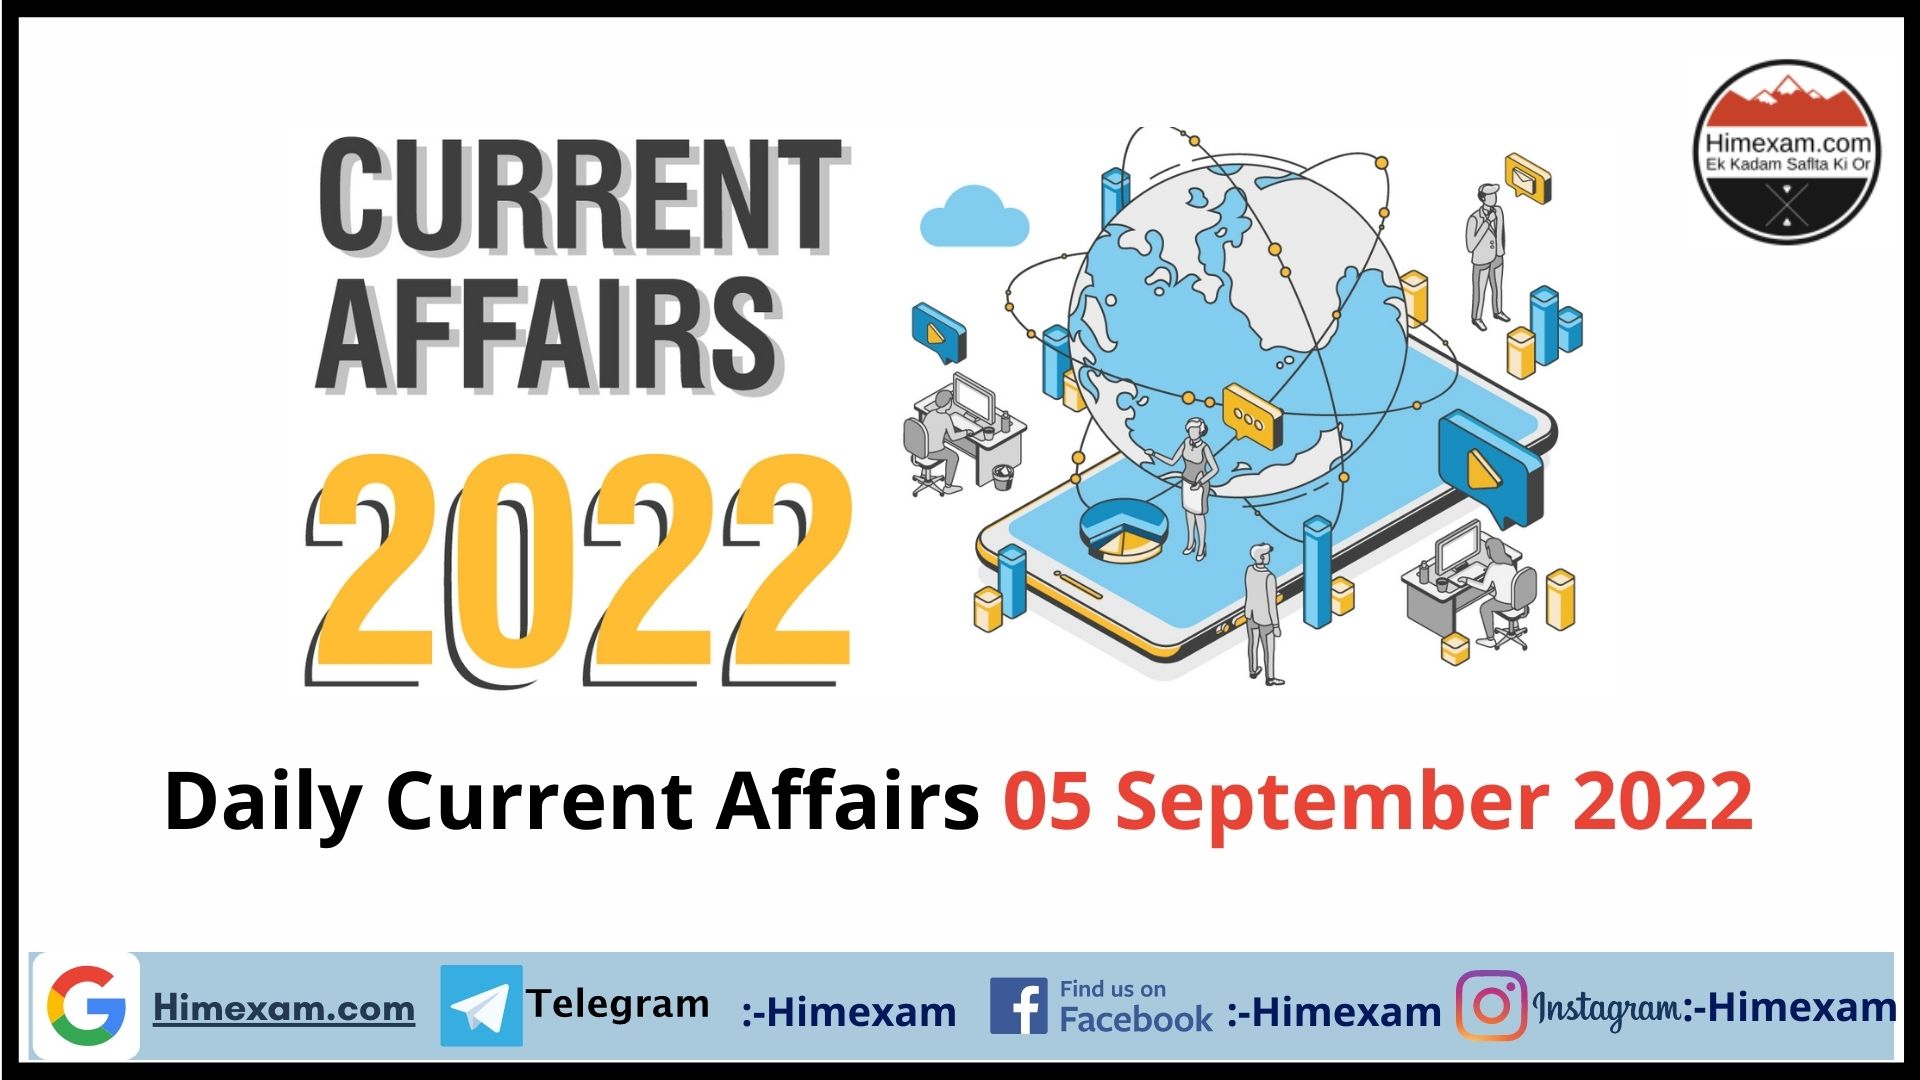 Daily Current Affairs 05 September 2022